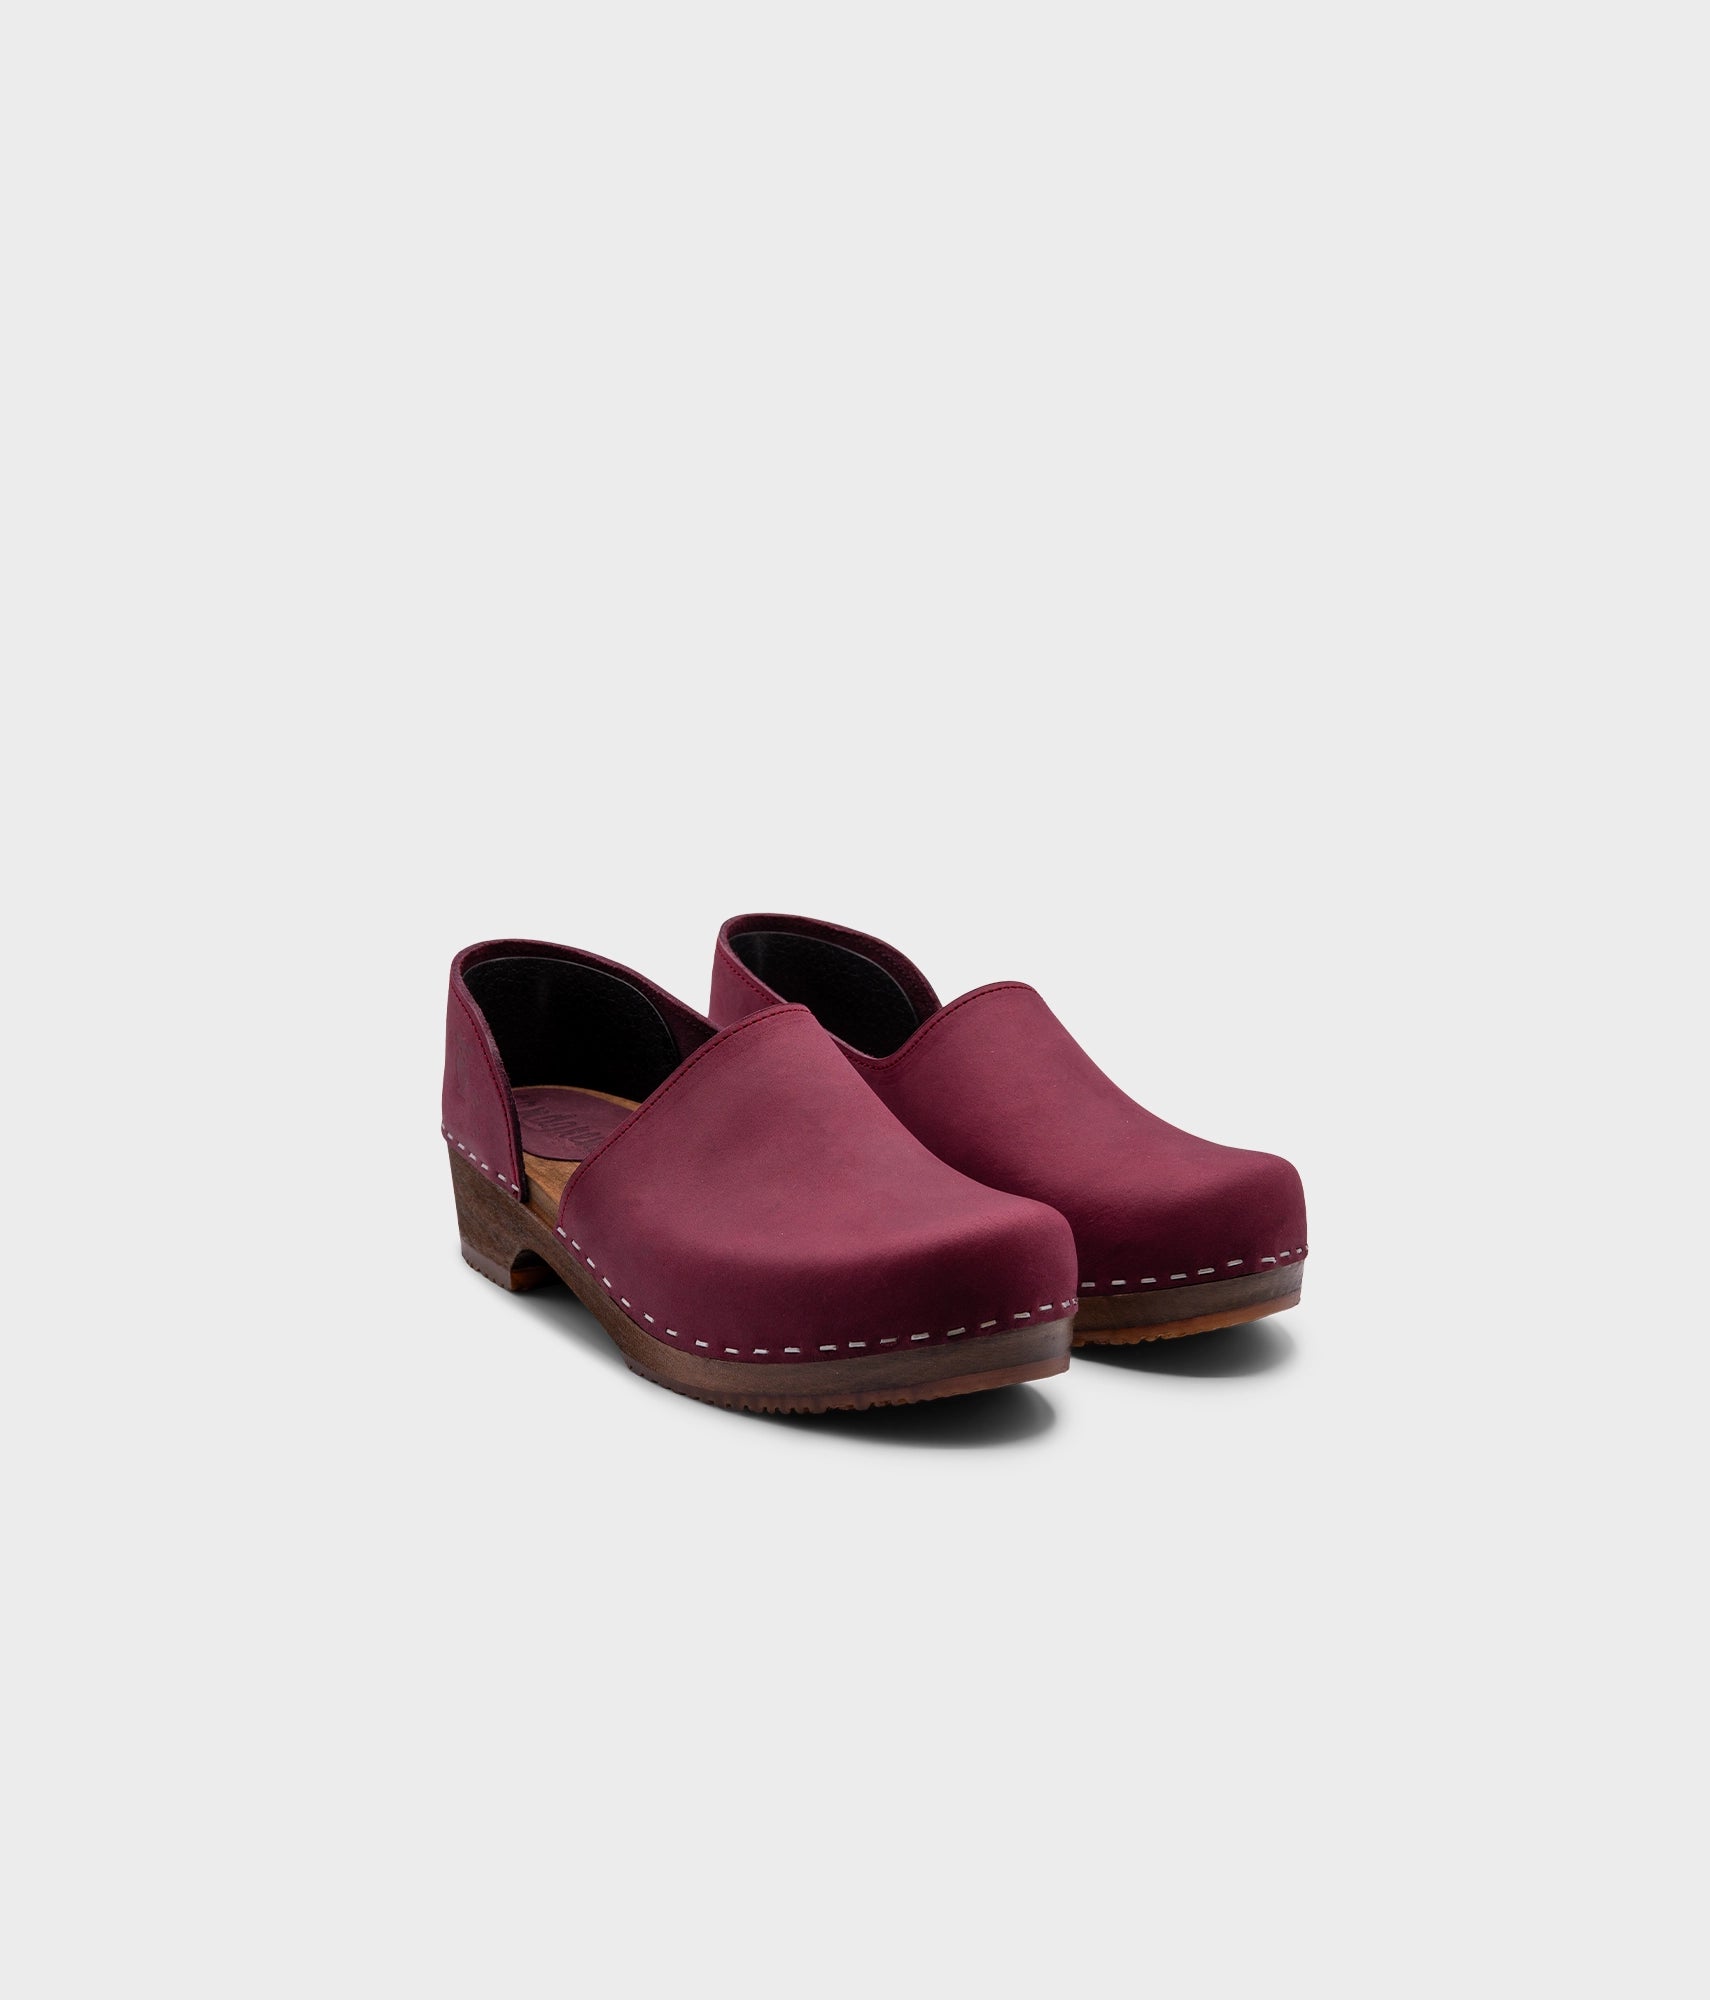 low heeled closed-back clogs in dark purple nubuck leather stapled on a dark wooden base